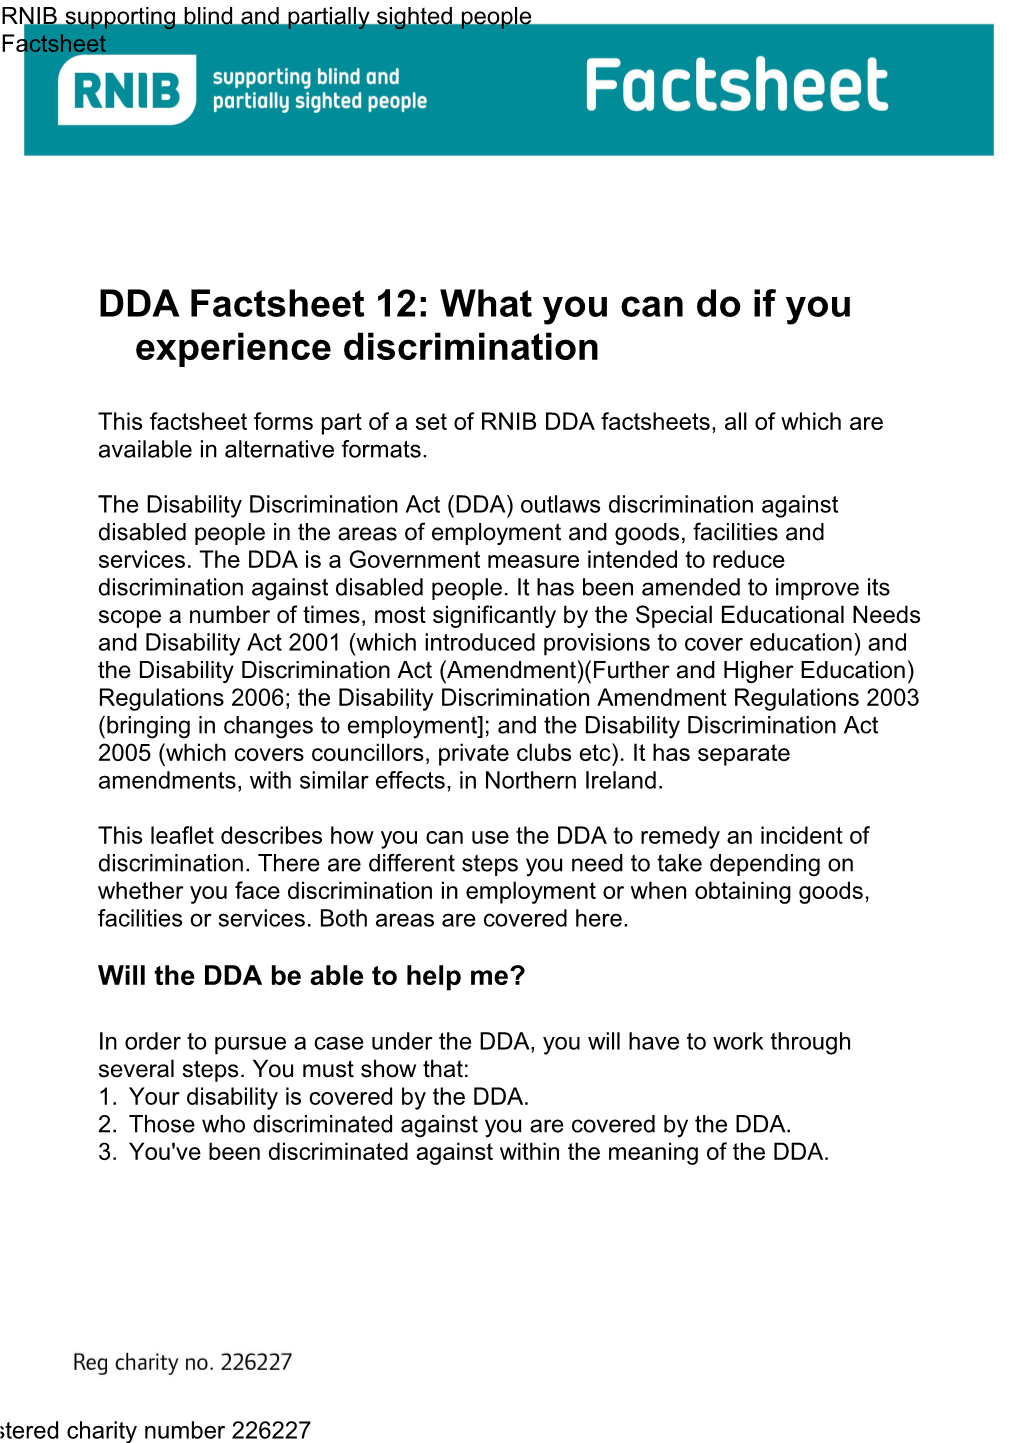 DDA Factsheet 12: What You Can Do If You Experience Discrimination